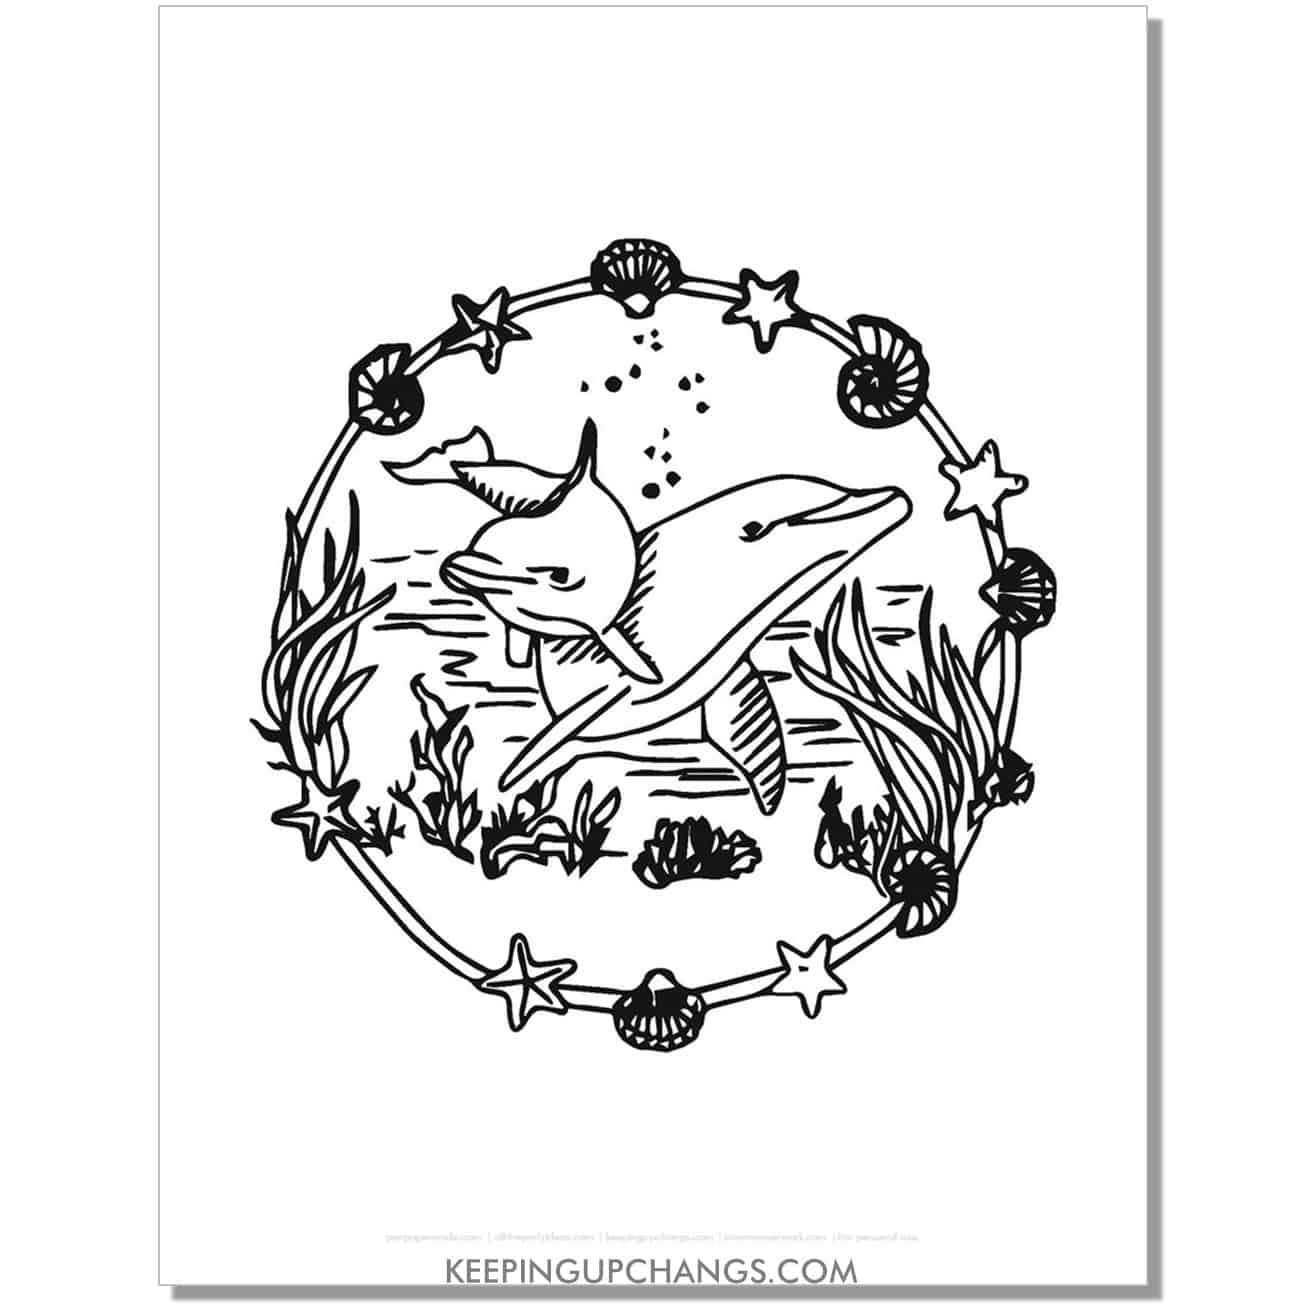 free dolphin in sea shell frame coloring page, sheet.